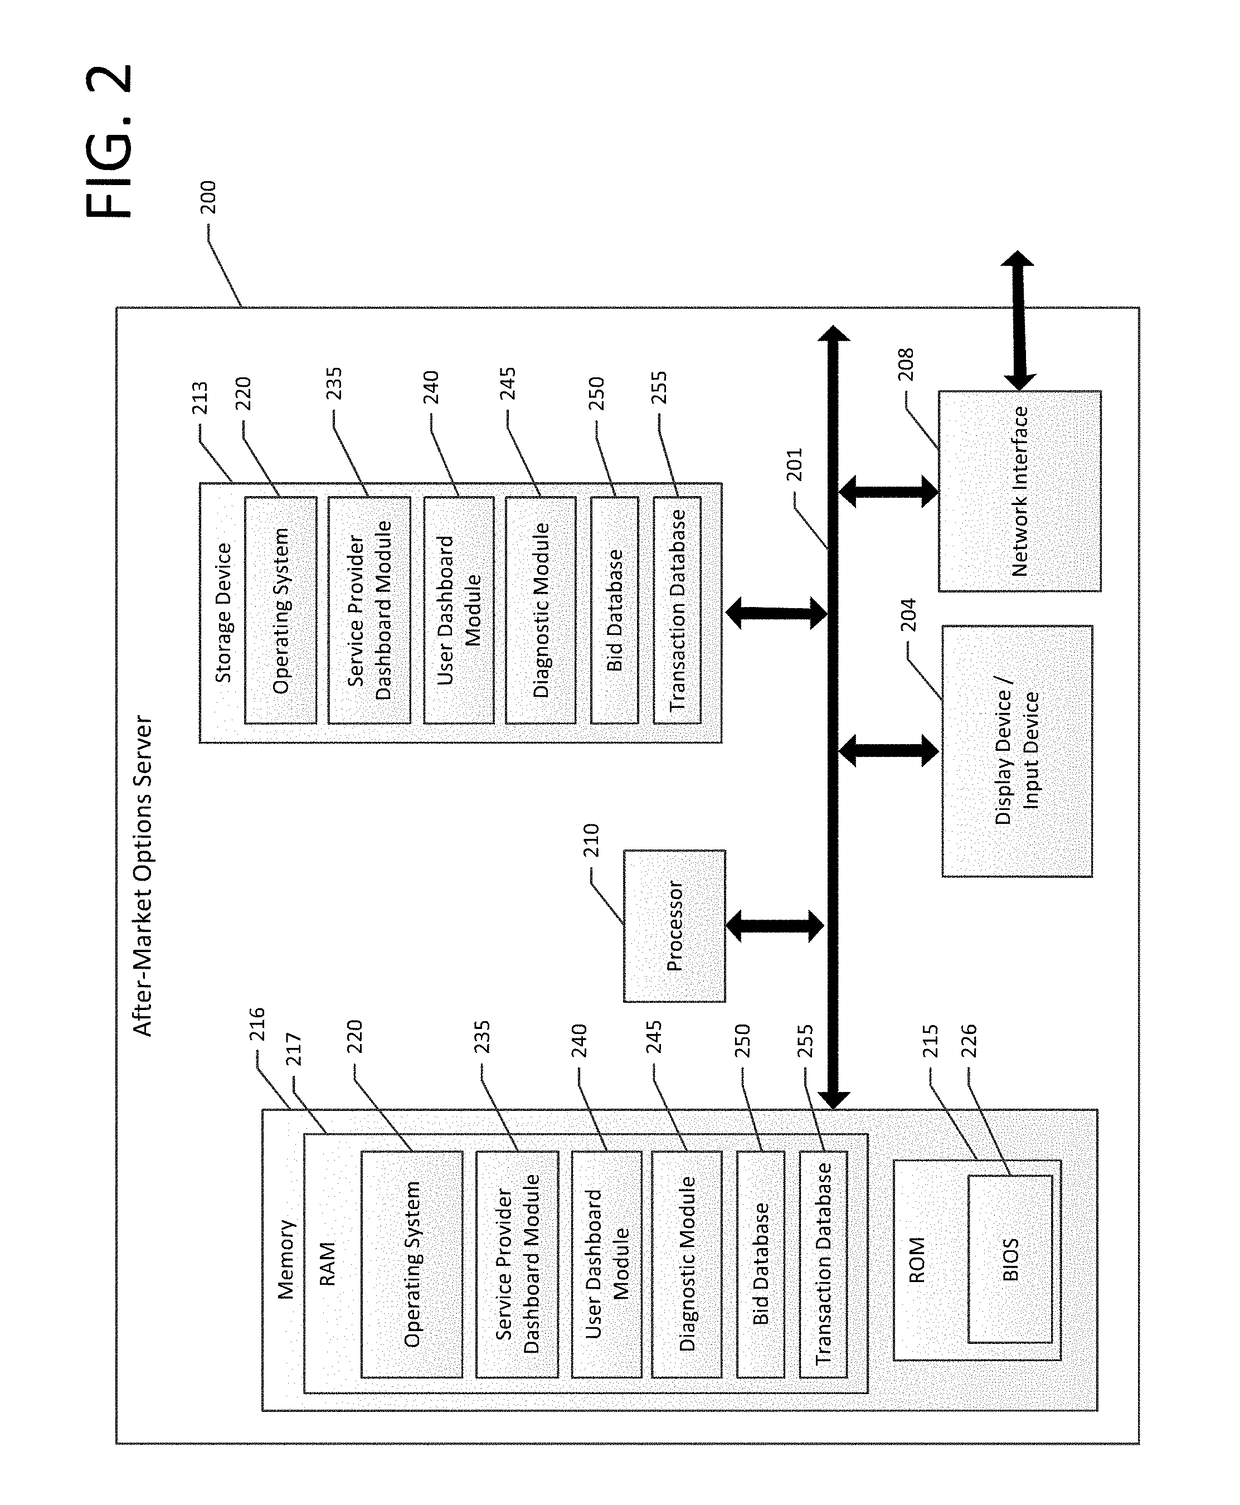 Concepts for repair and service of a consumer device using a network connection and diagnostic test